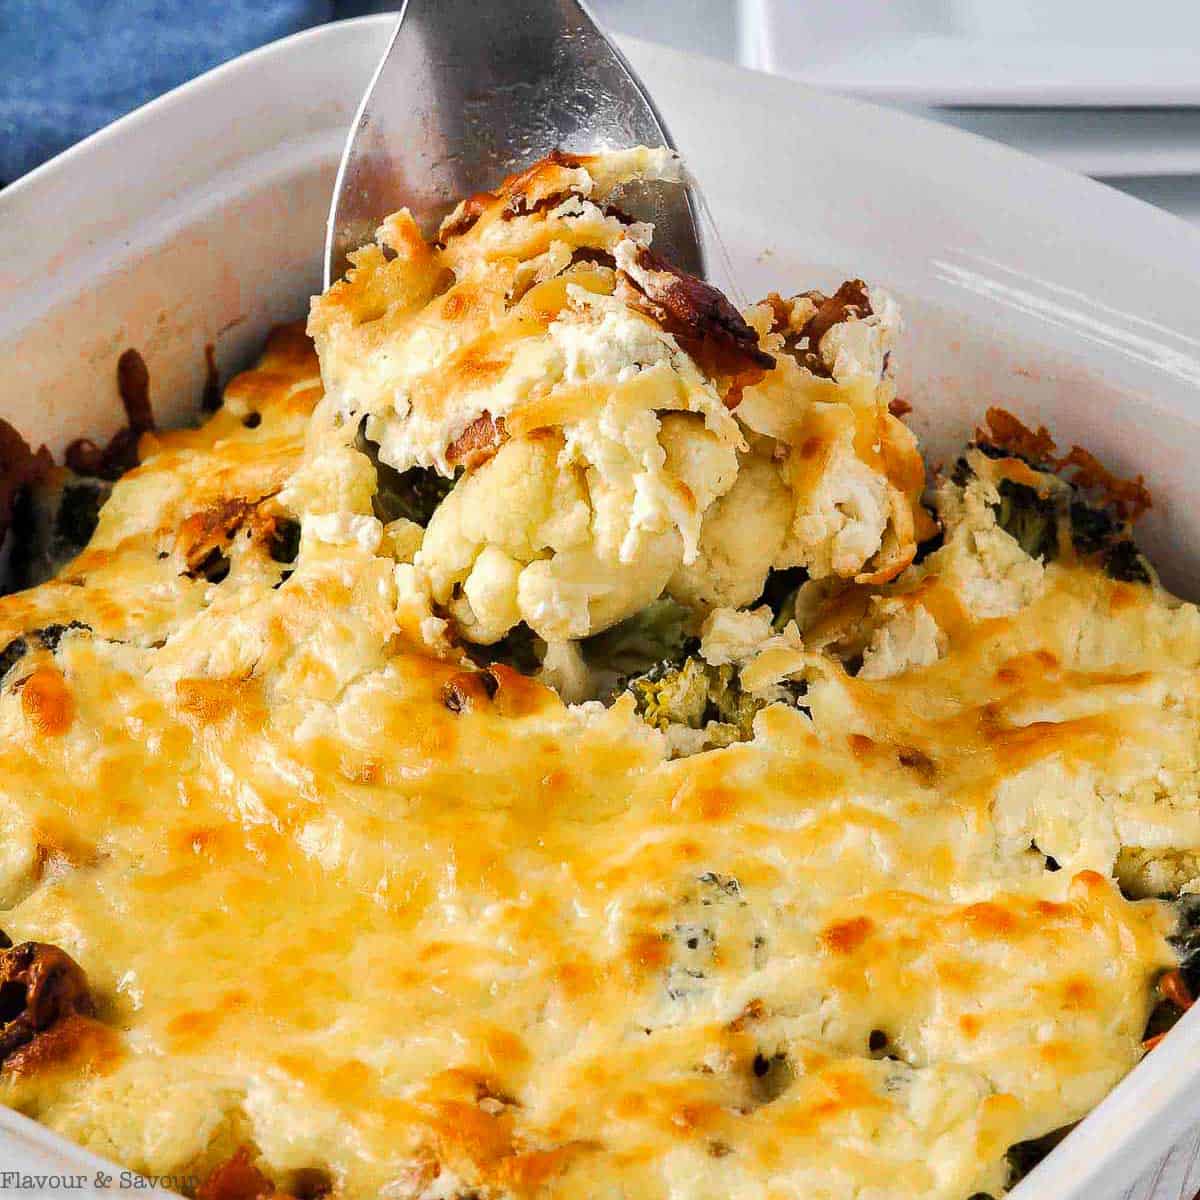 A spoonful of broccoli cauliflower casserole with cheese.